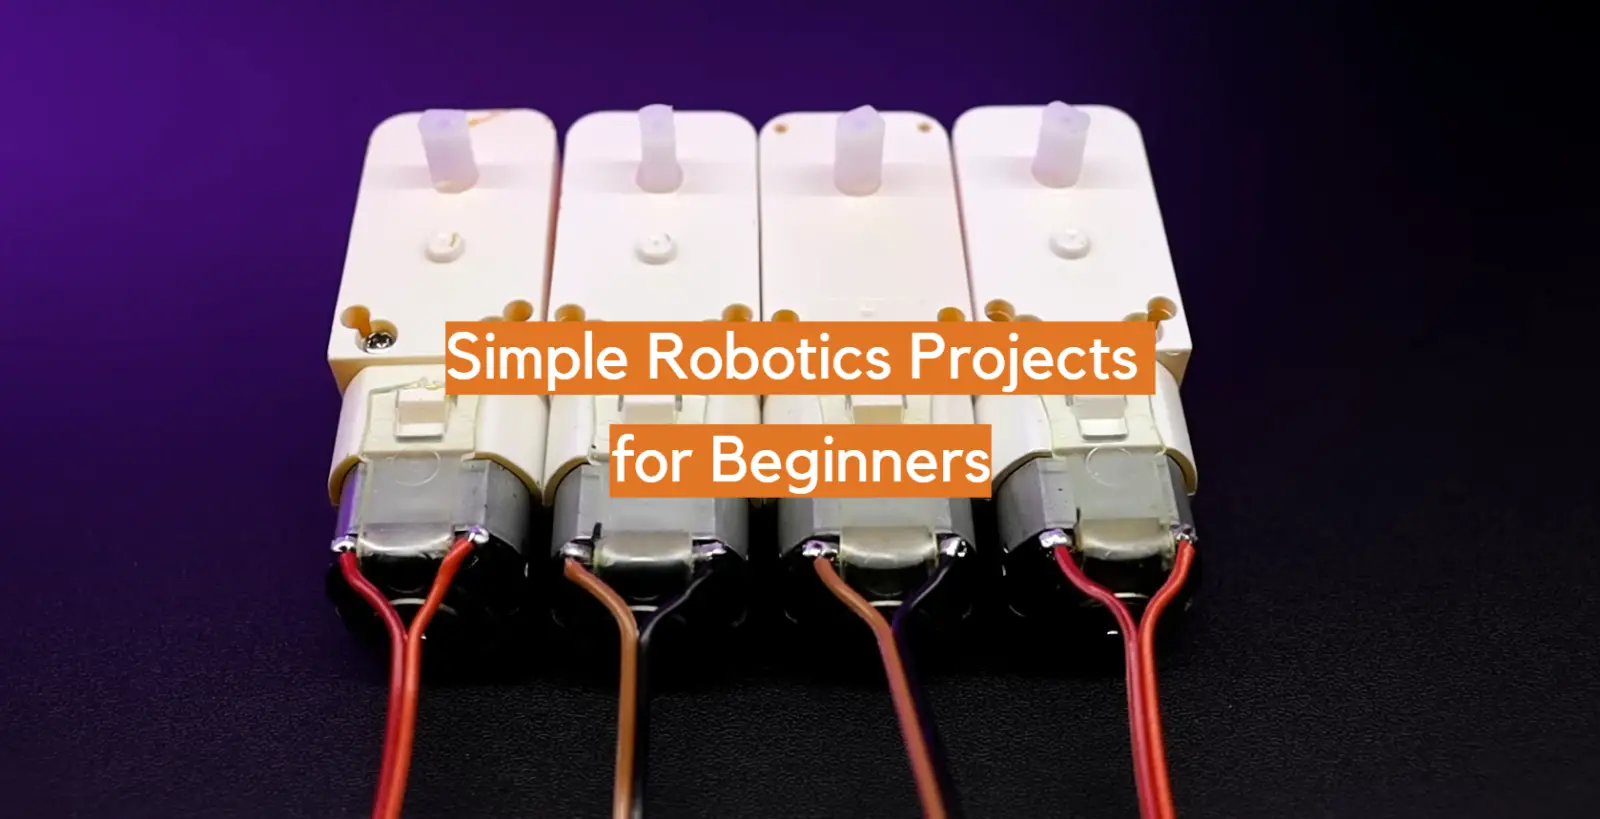 Simple Robotics Projects for Beginners